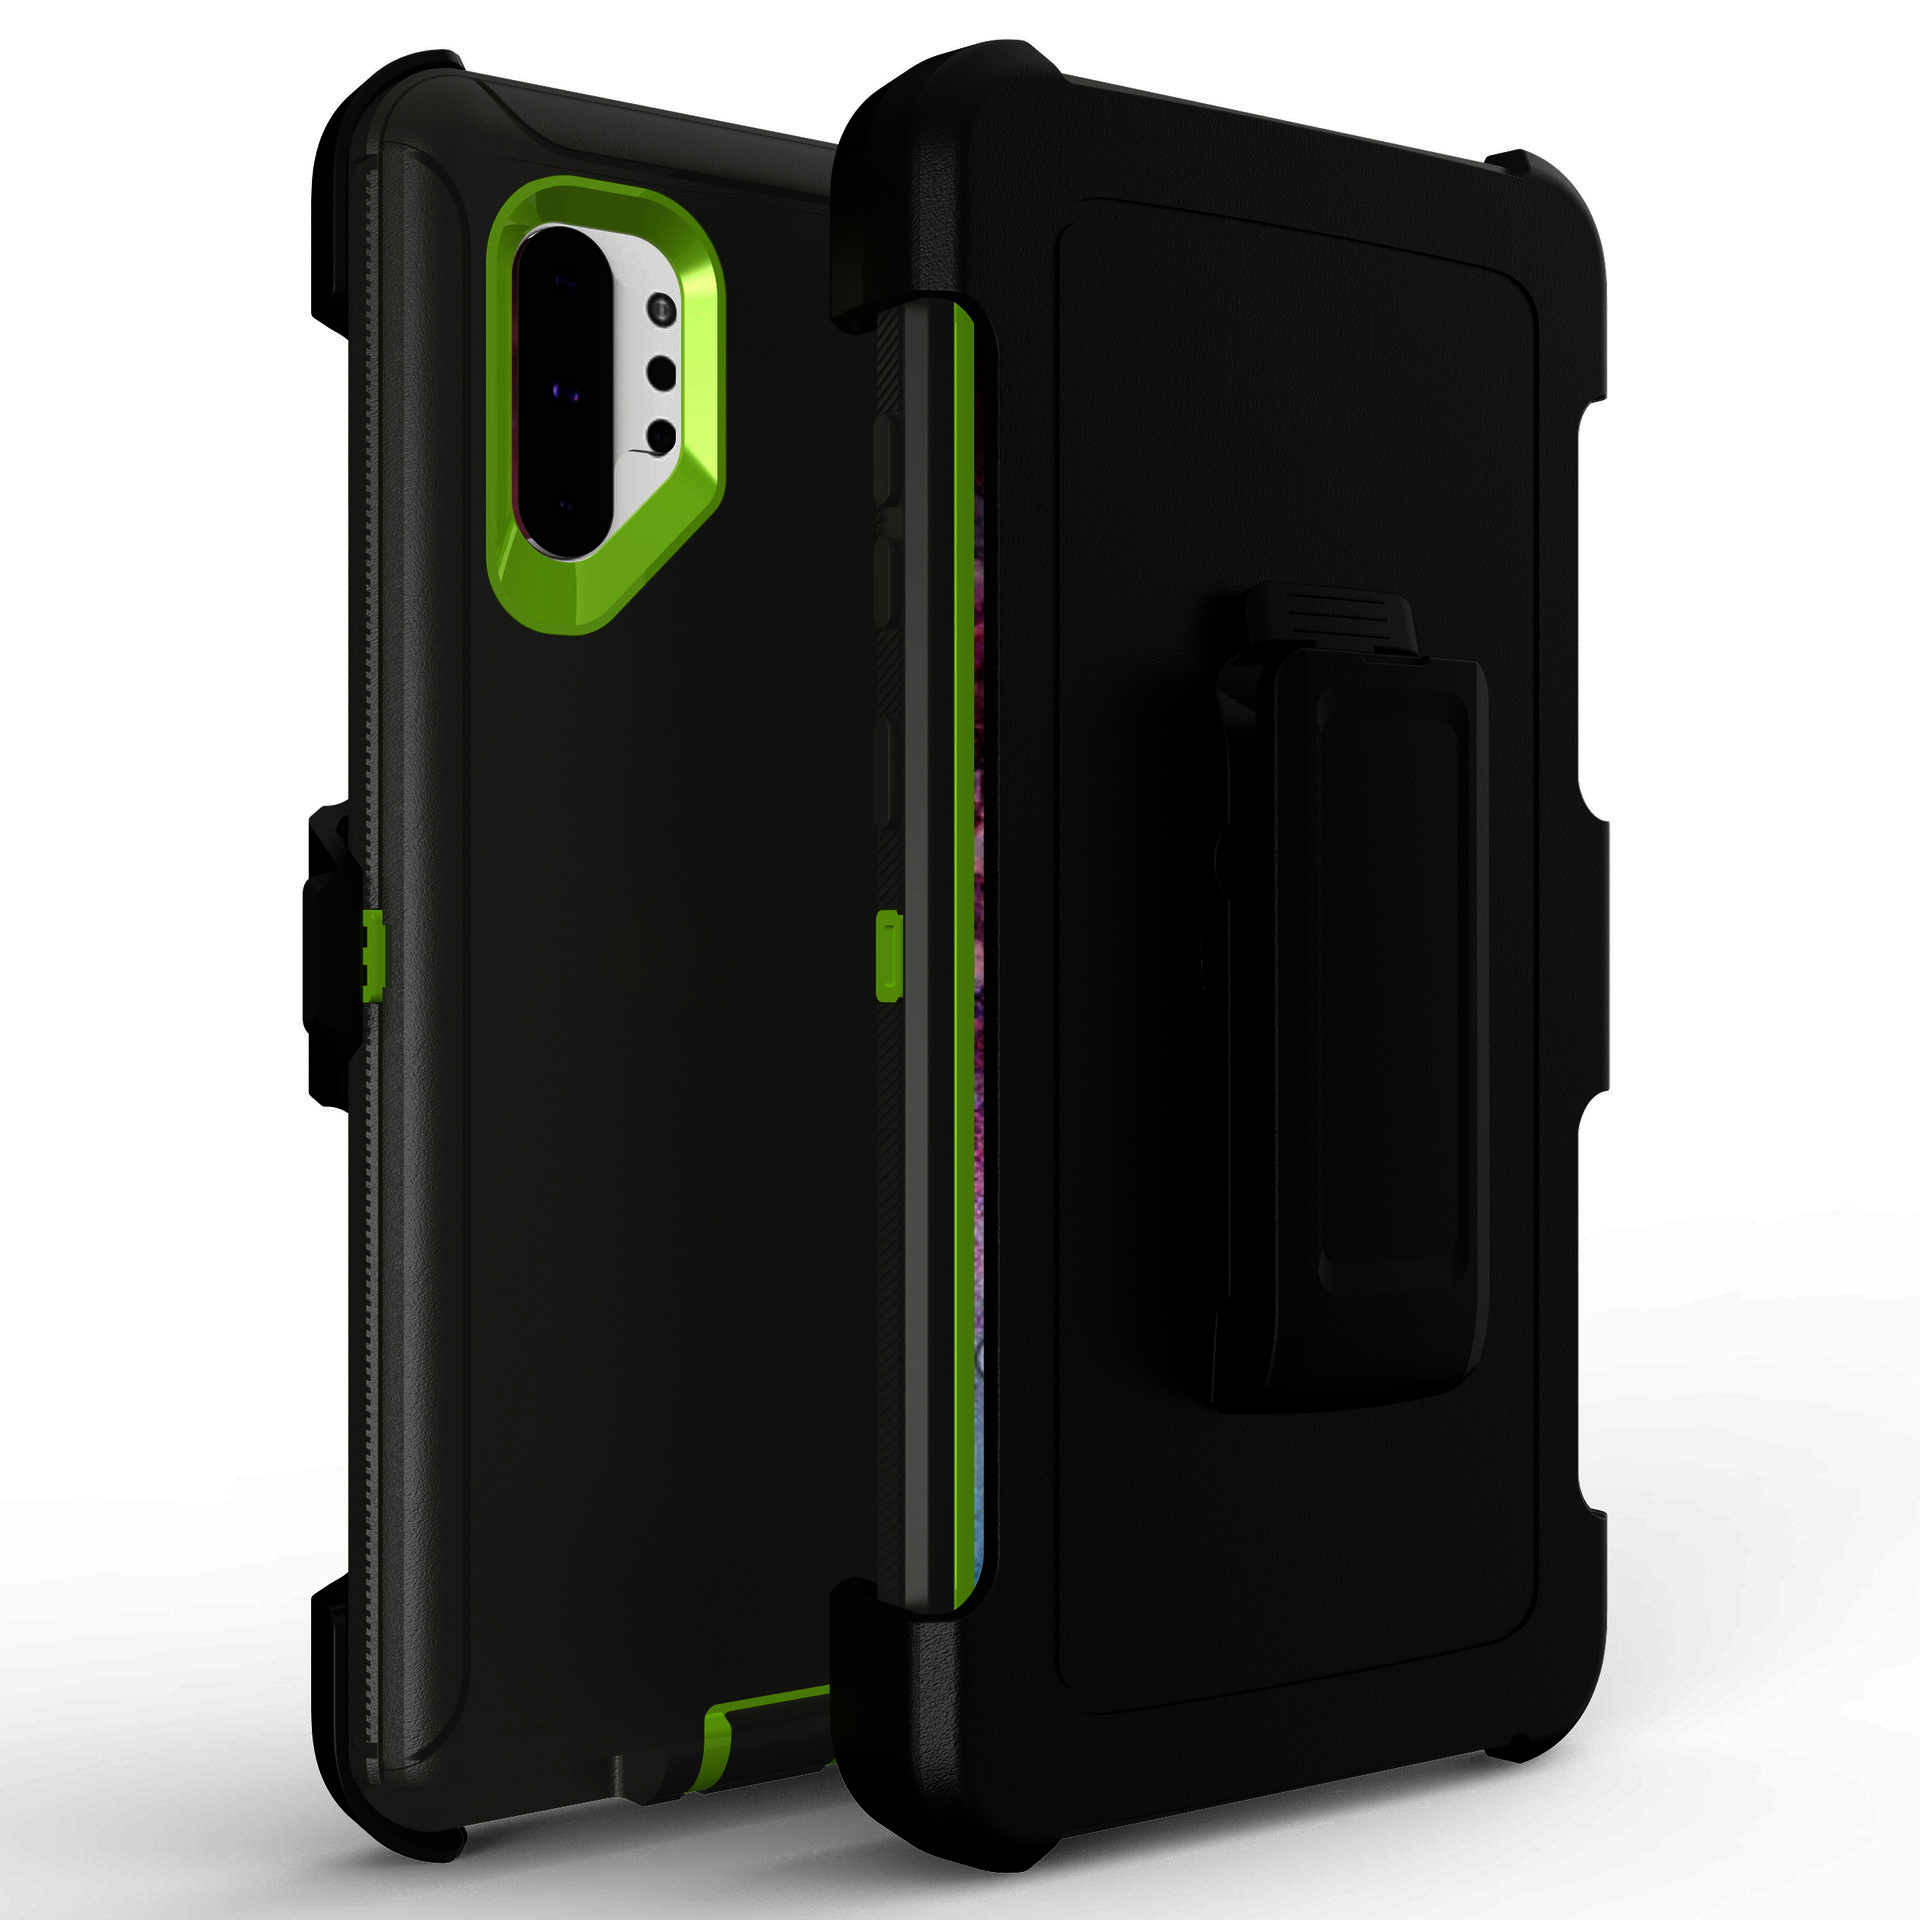 Galaxy Note 10+ (Plus) Armor Robot Case with Clip (Black Green)